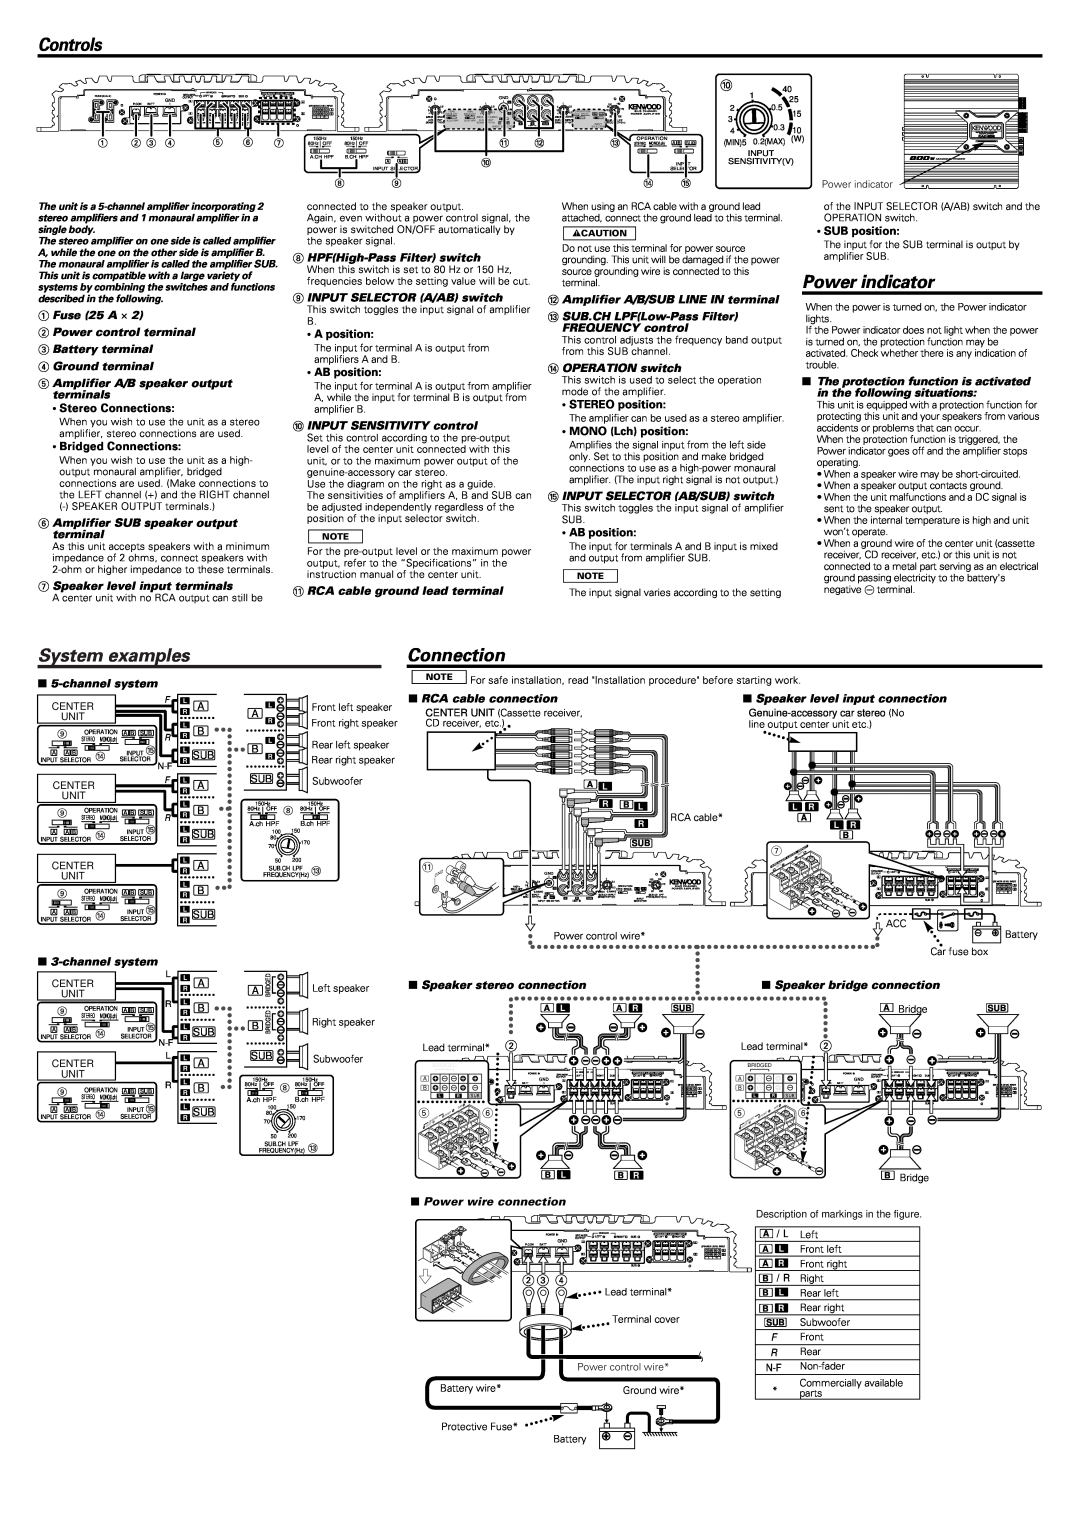 Kenwood KAC-959 Controls, Power indicator, System examples, Stereo Connections, Bridged Connections, A position 